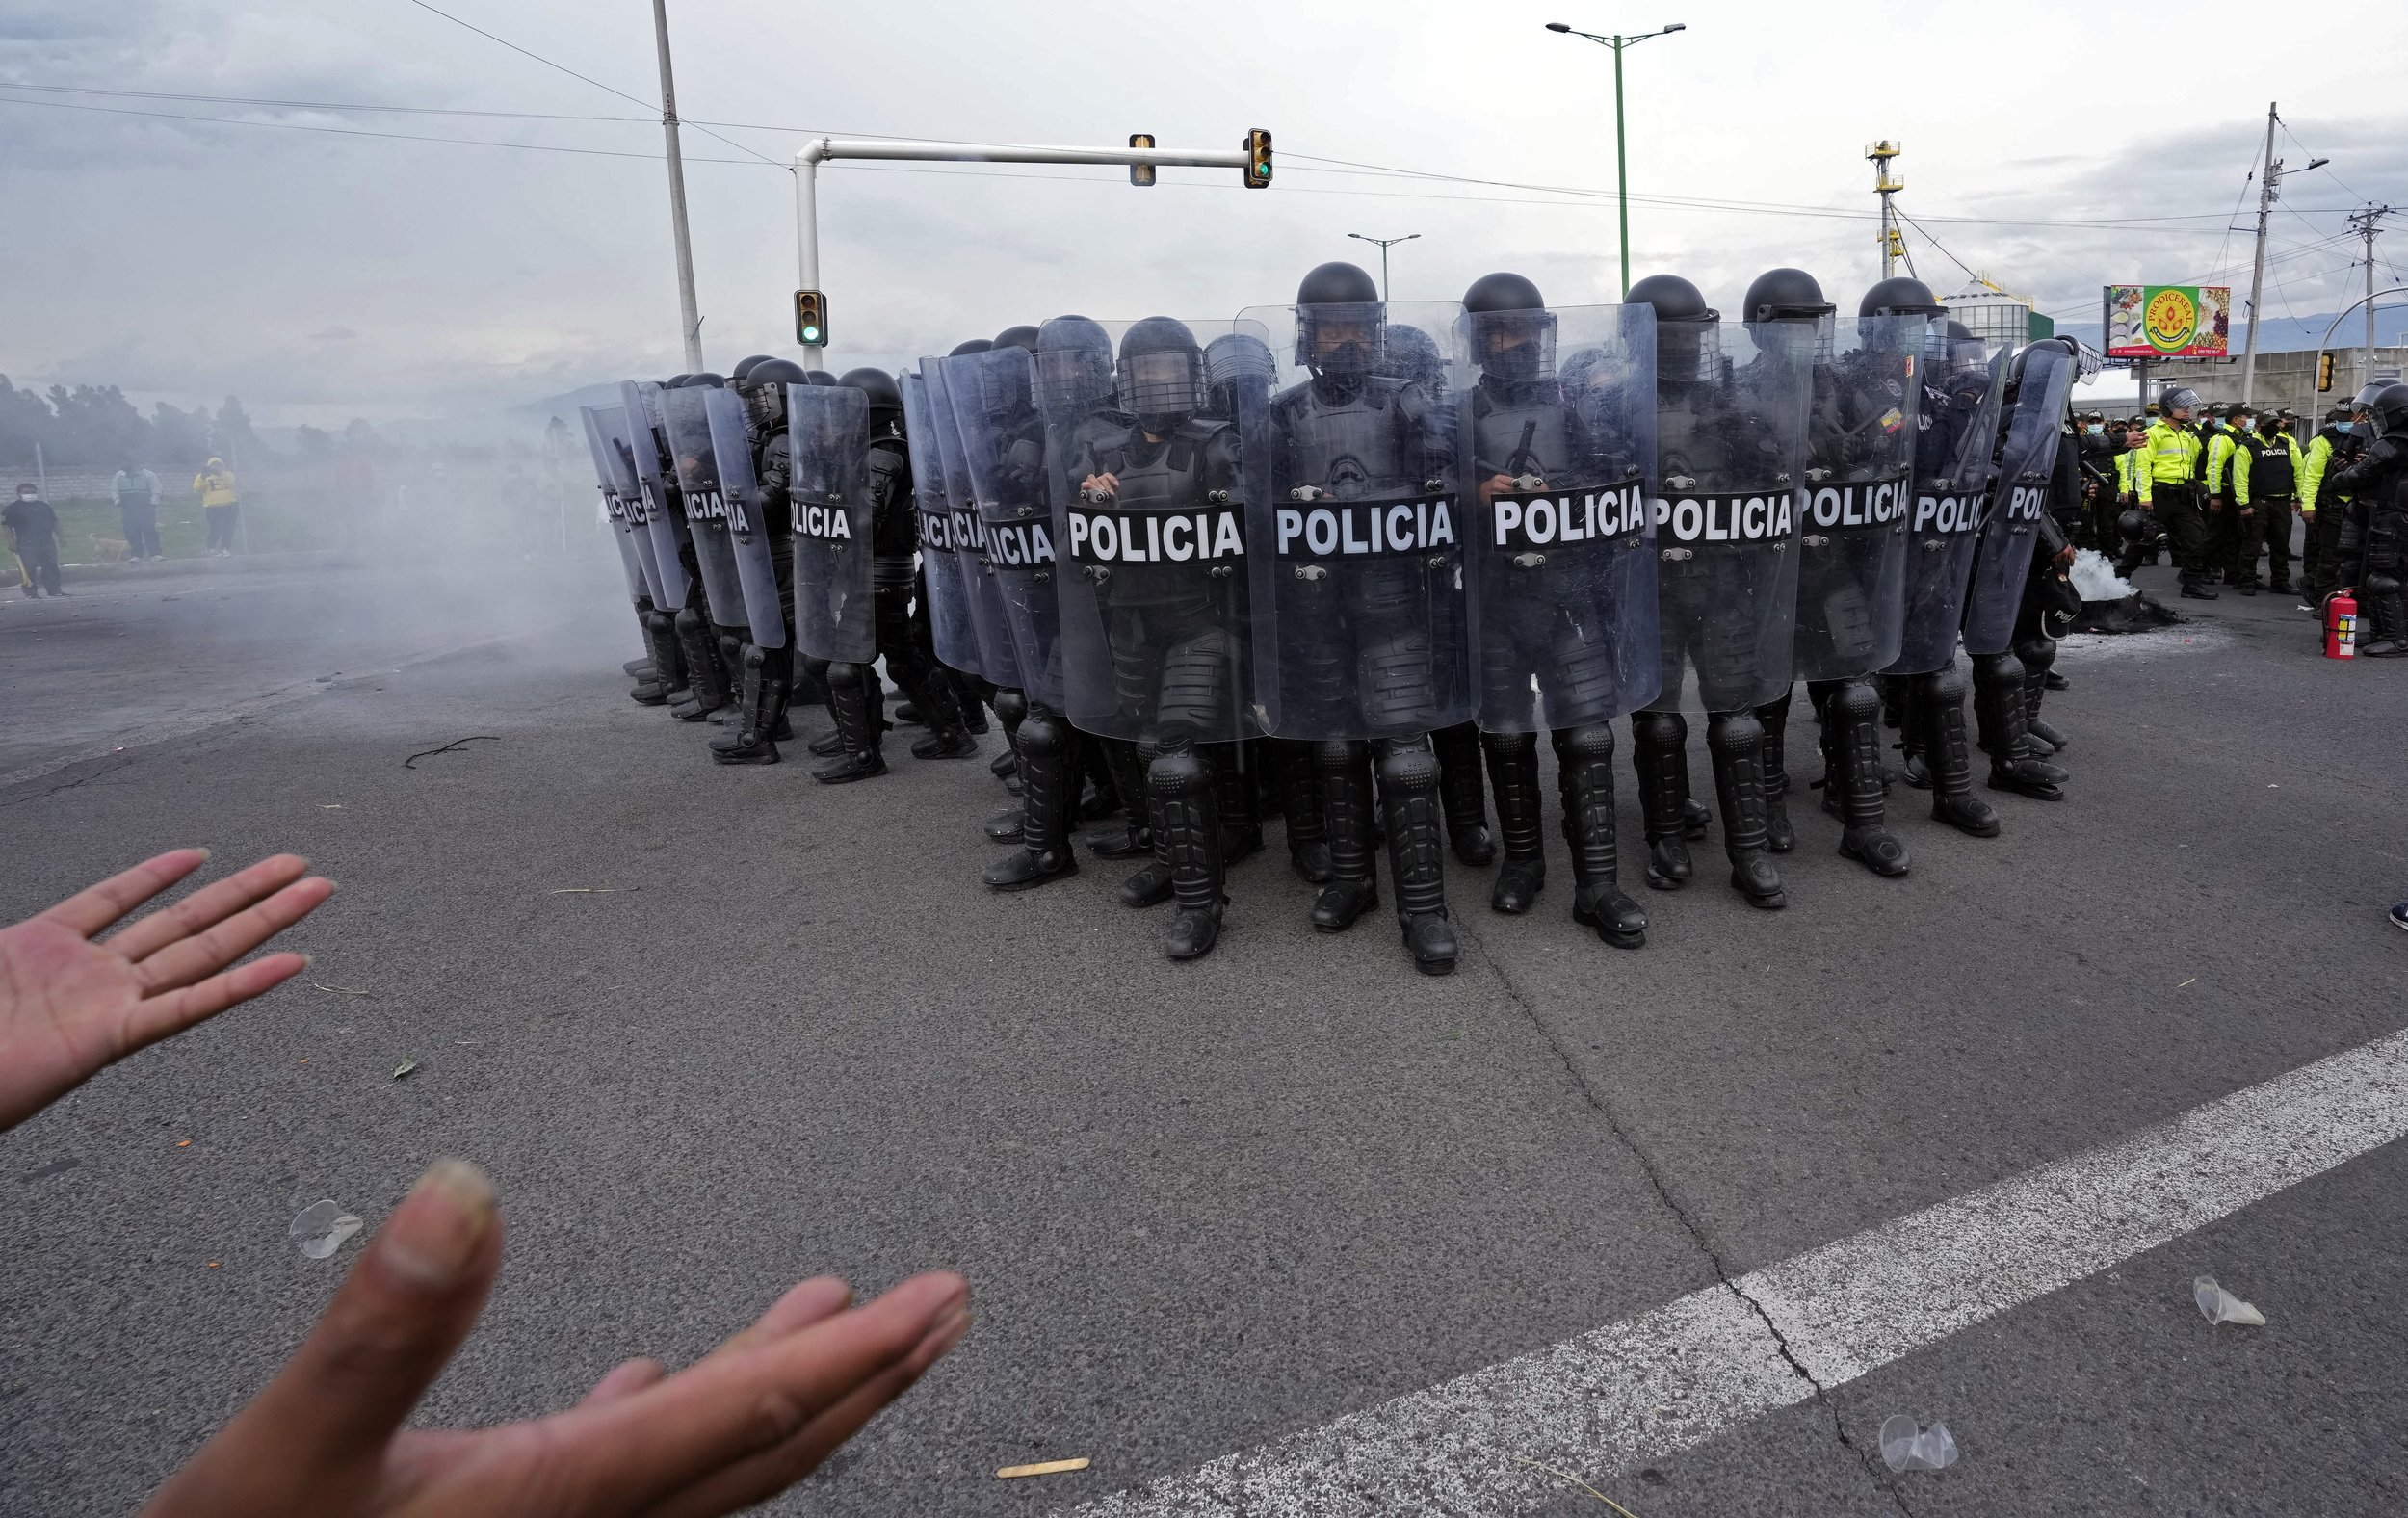  Police face off against people protesting the rise in gas prices and the policies of President Guillermo Lasso’s government in Saquisili, Ecuador, on Oct. 26, 2021. (AP Photo/Dolores Ochoa) 